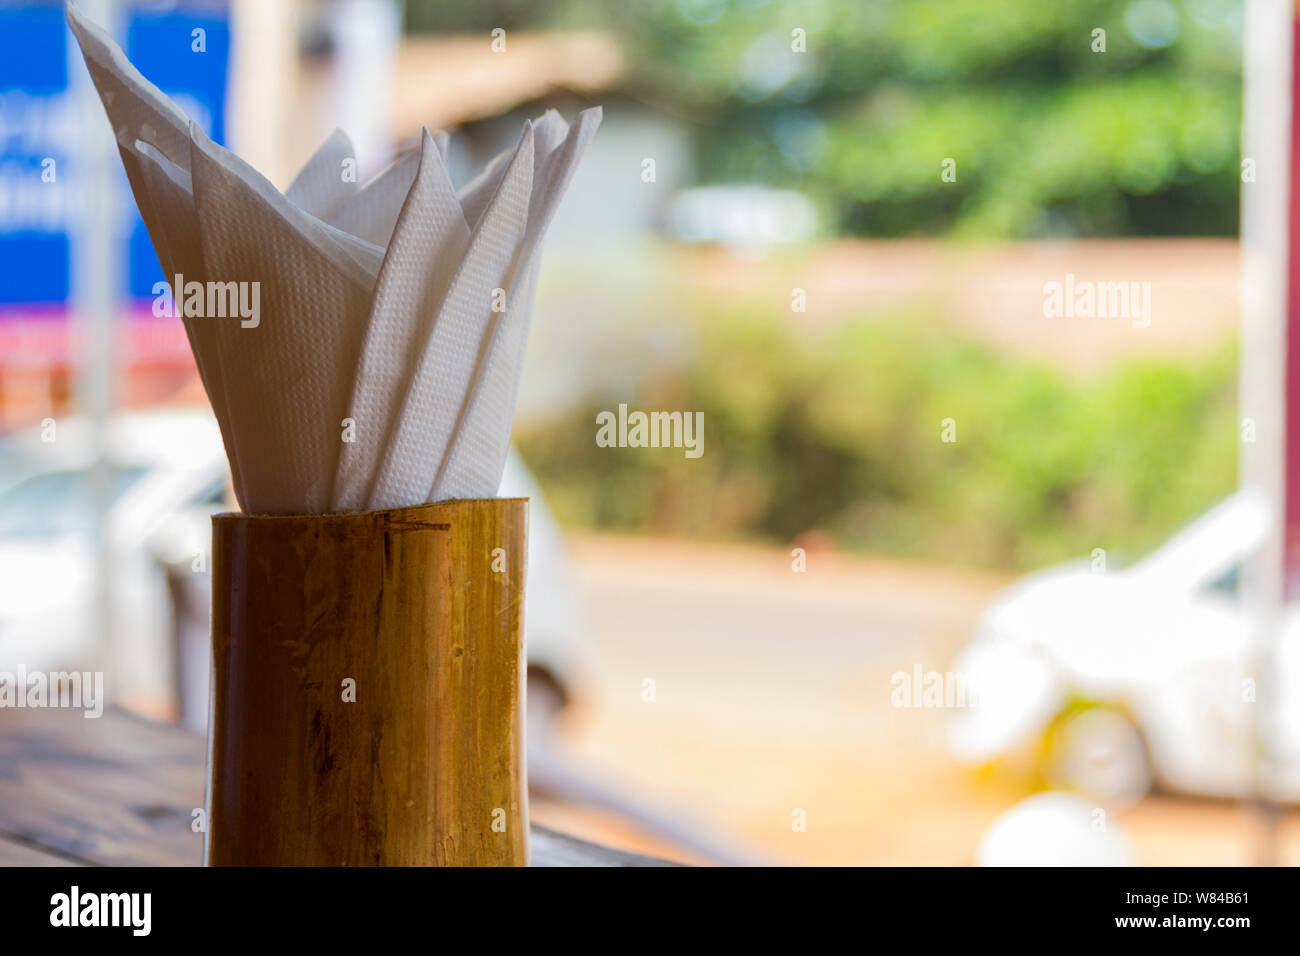 Wooden napkin holder on table in open-door green blur background. Close up, selective focus. Stock Photo